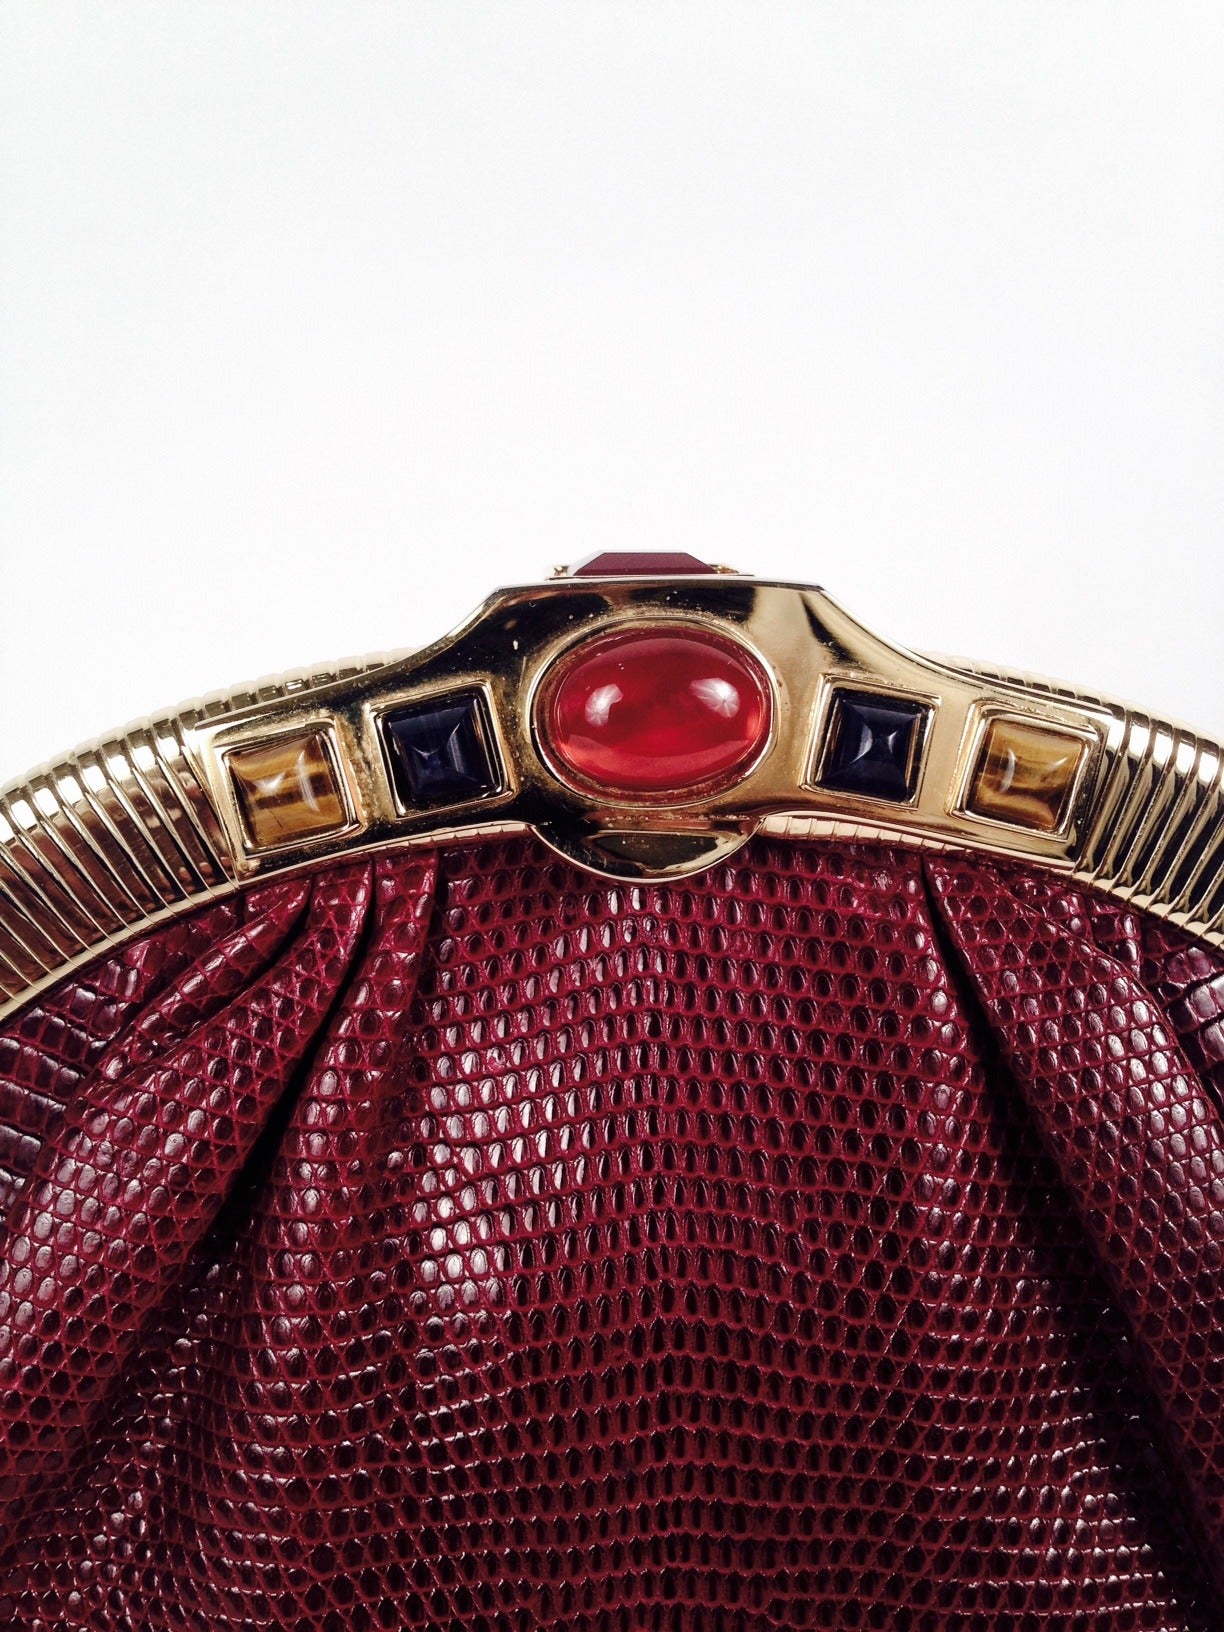 Vintage Judith Leiber Burgundy Lizard Evening Bag With Jeweled Clasp For Sale 2